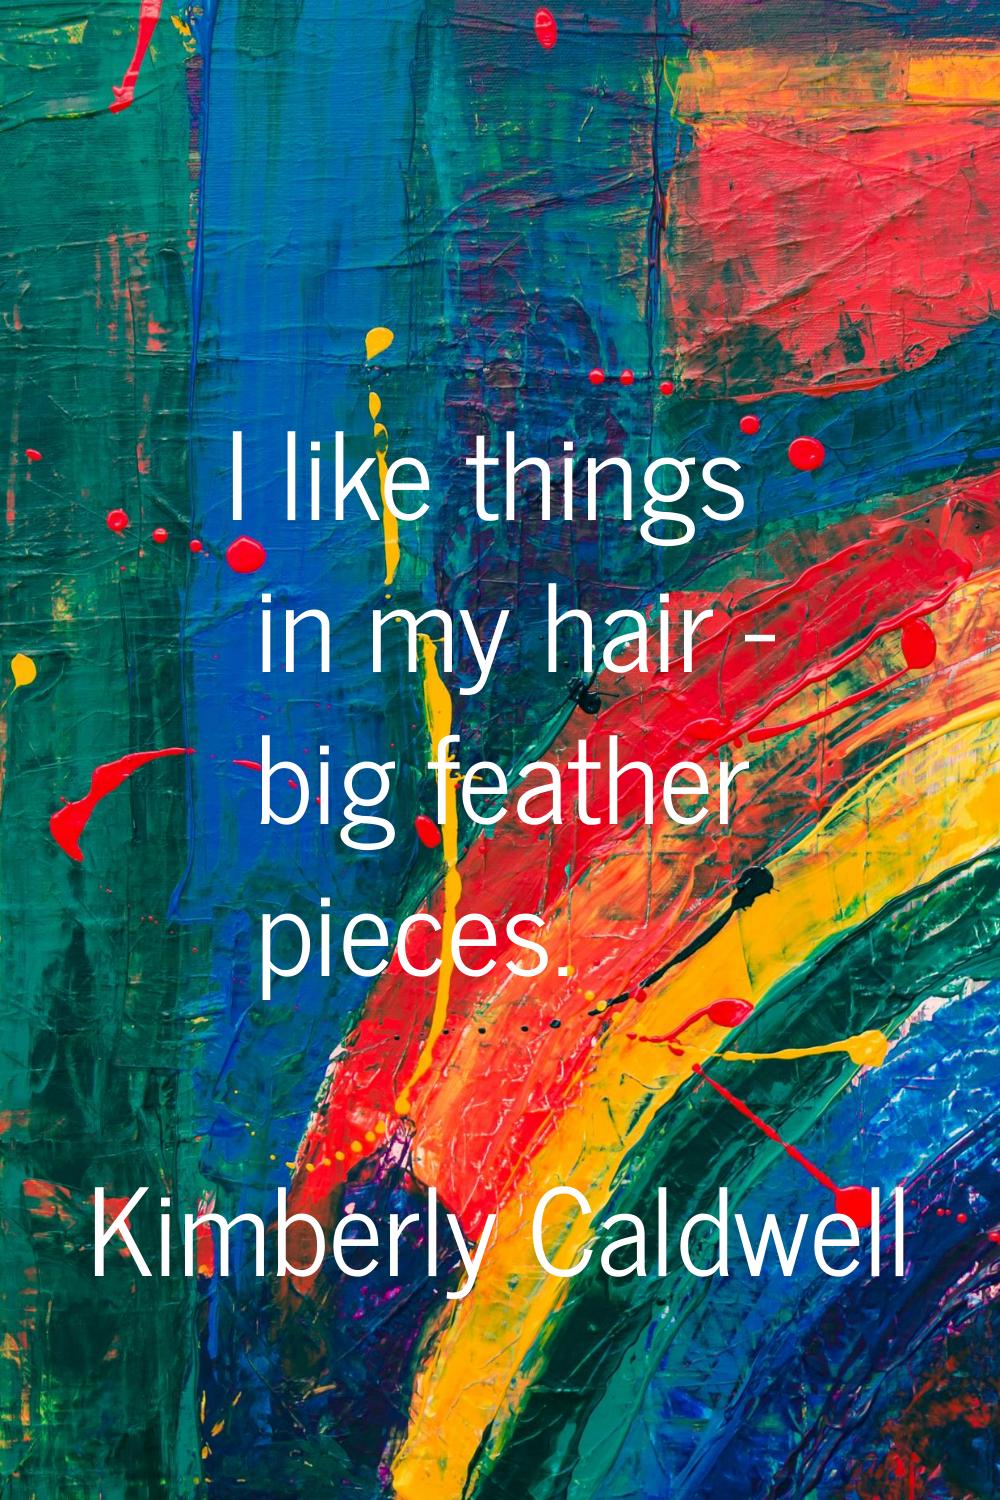 I like things in my hair - big feather pieces.